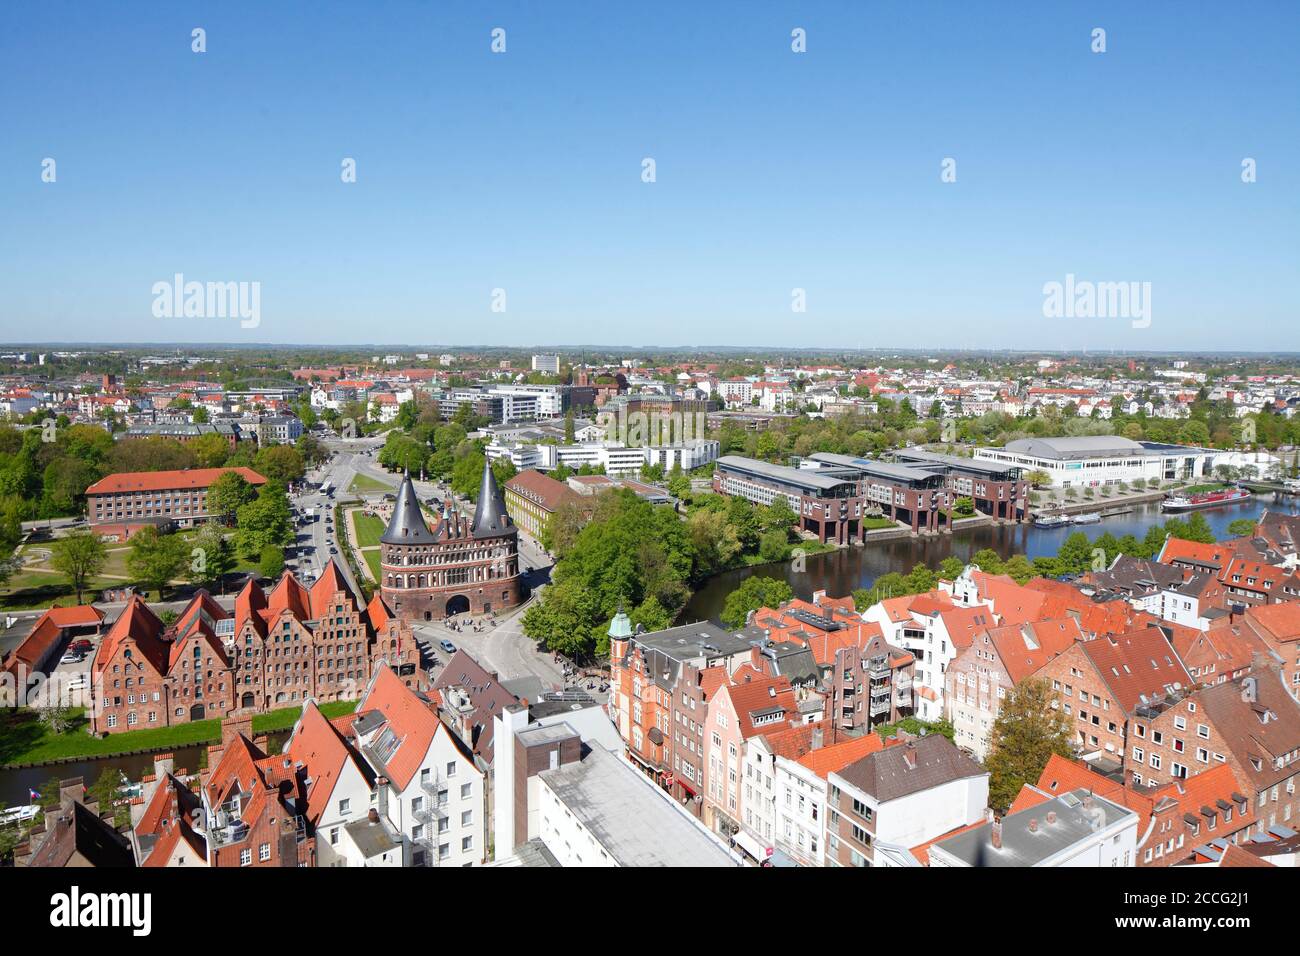 View of historic salt storage and the Holsten Gate from the Petrikirche, Lübeck, Schleswig-Holstein, Germany, Europe Stock Photo